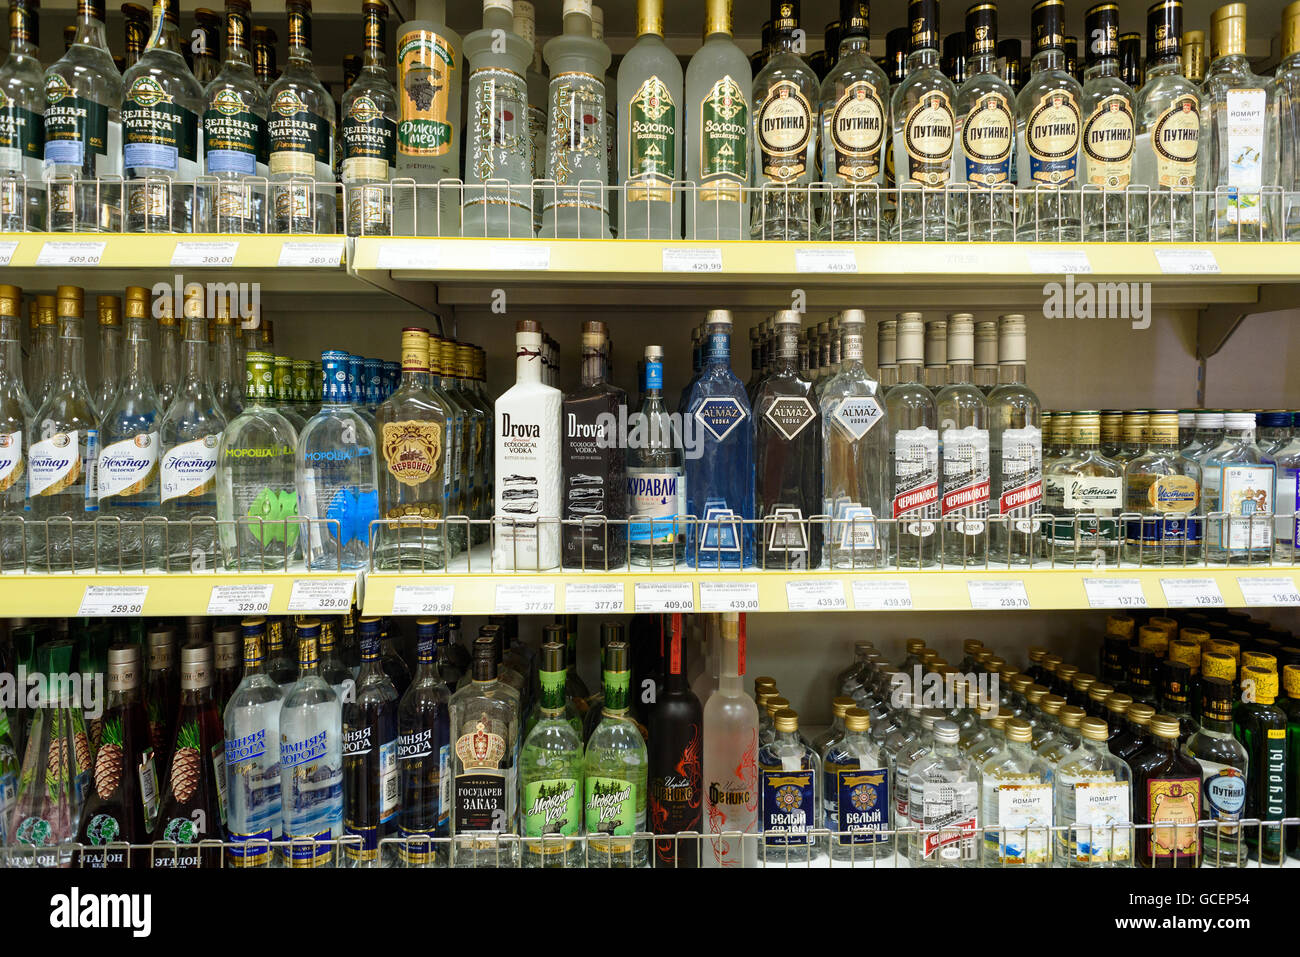 Rows of many bottles of Russian Vodka in a Shop in Russia Stock Photo